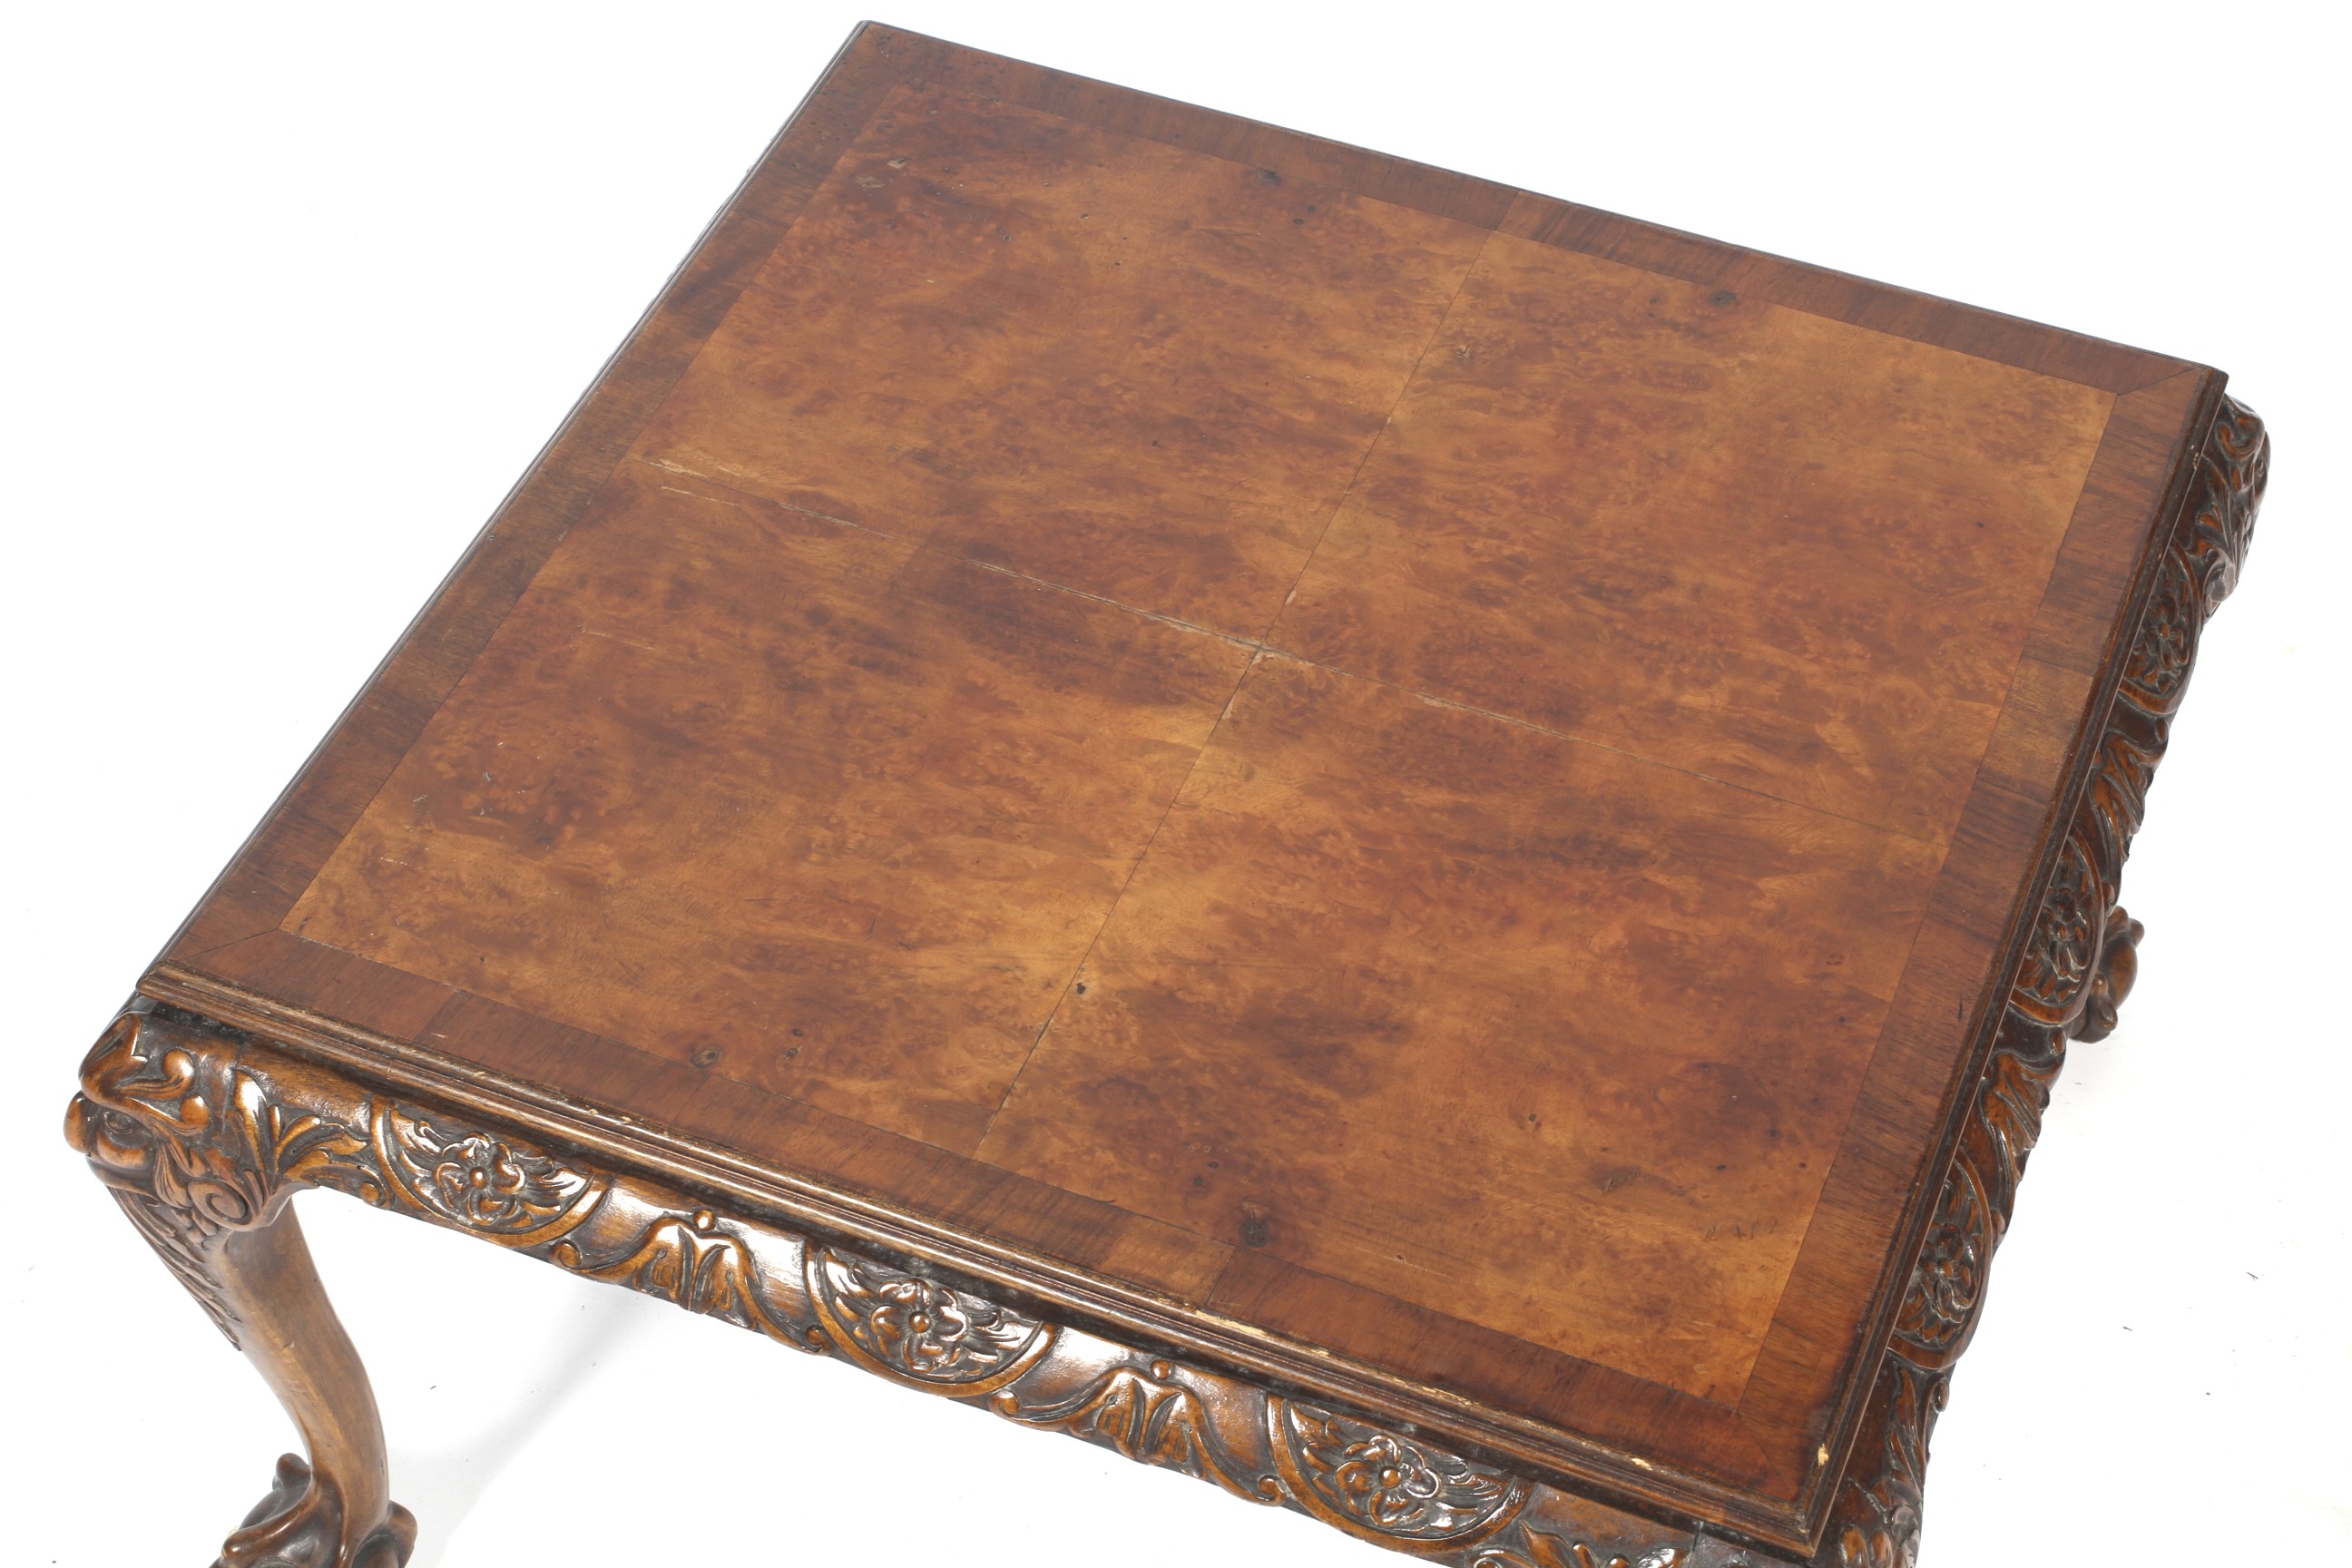 A 20th century Georgian style coffee table. - Image 2 of 2